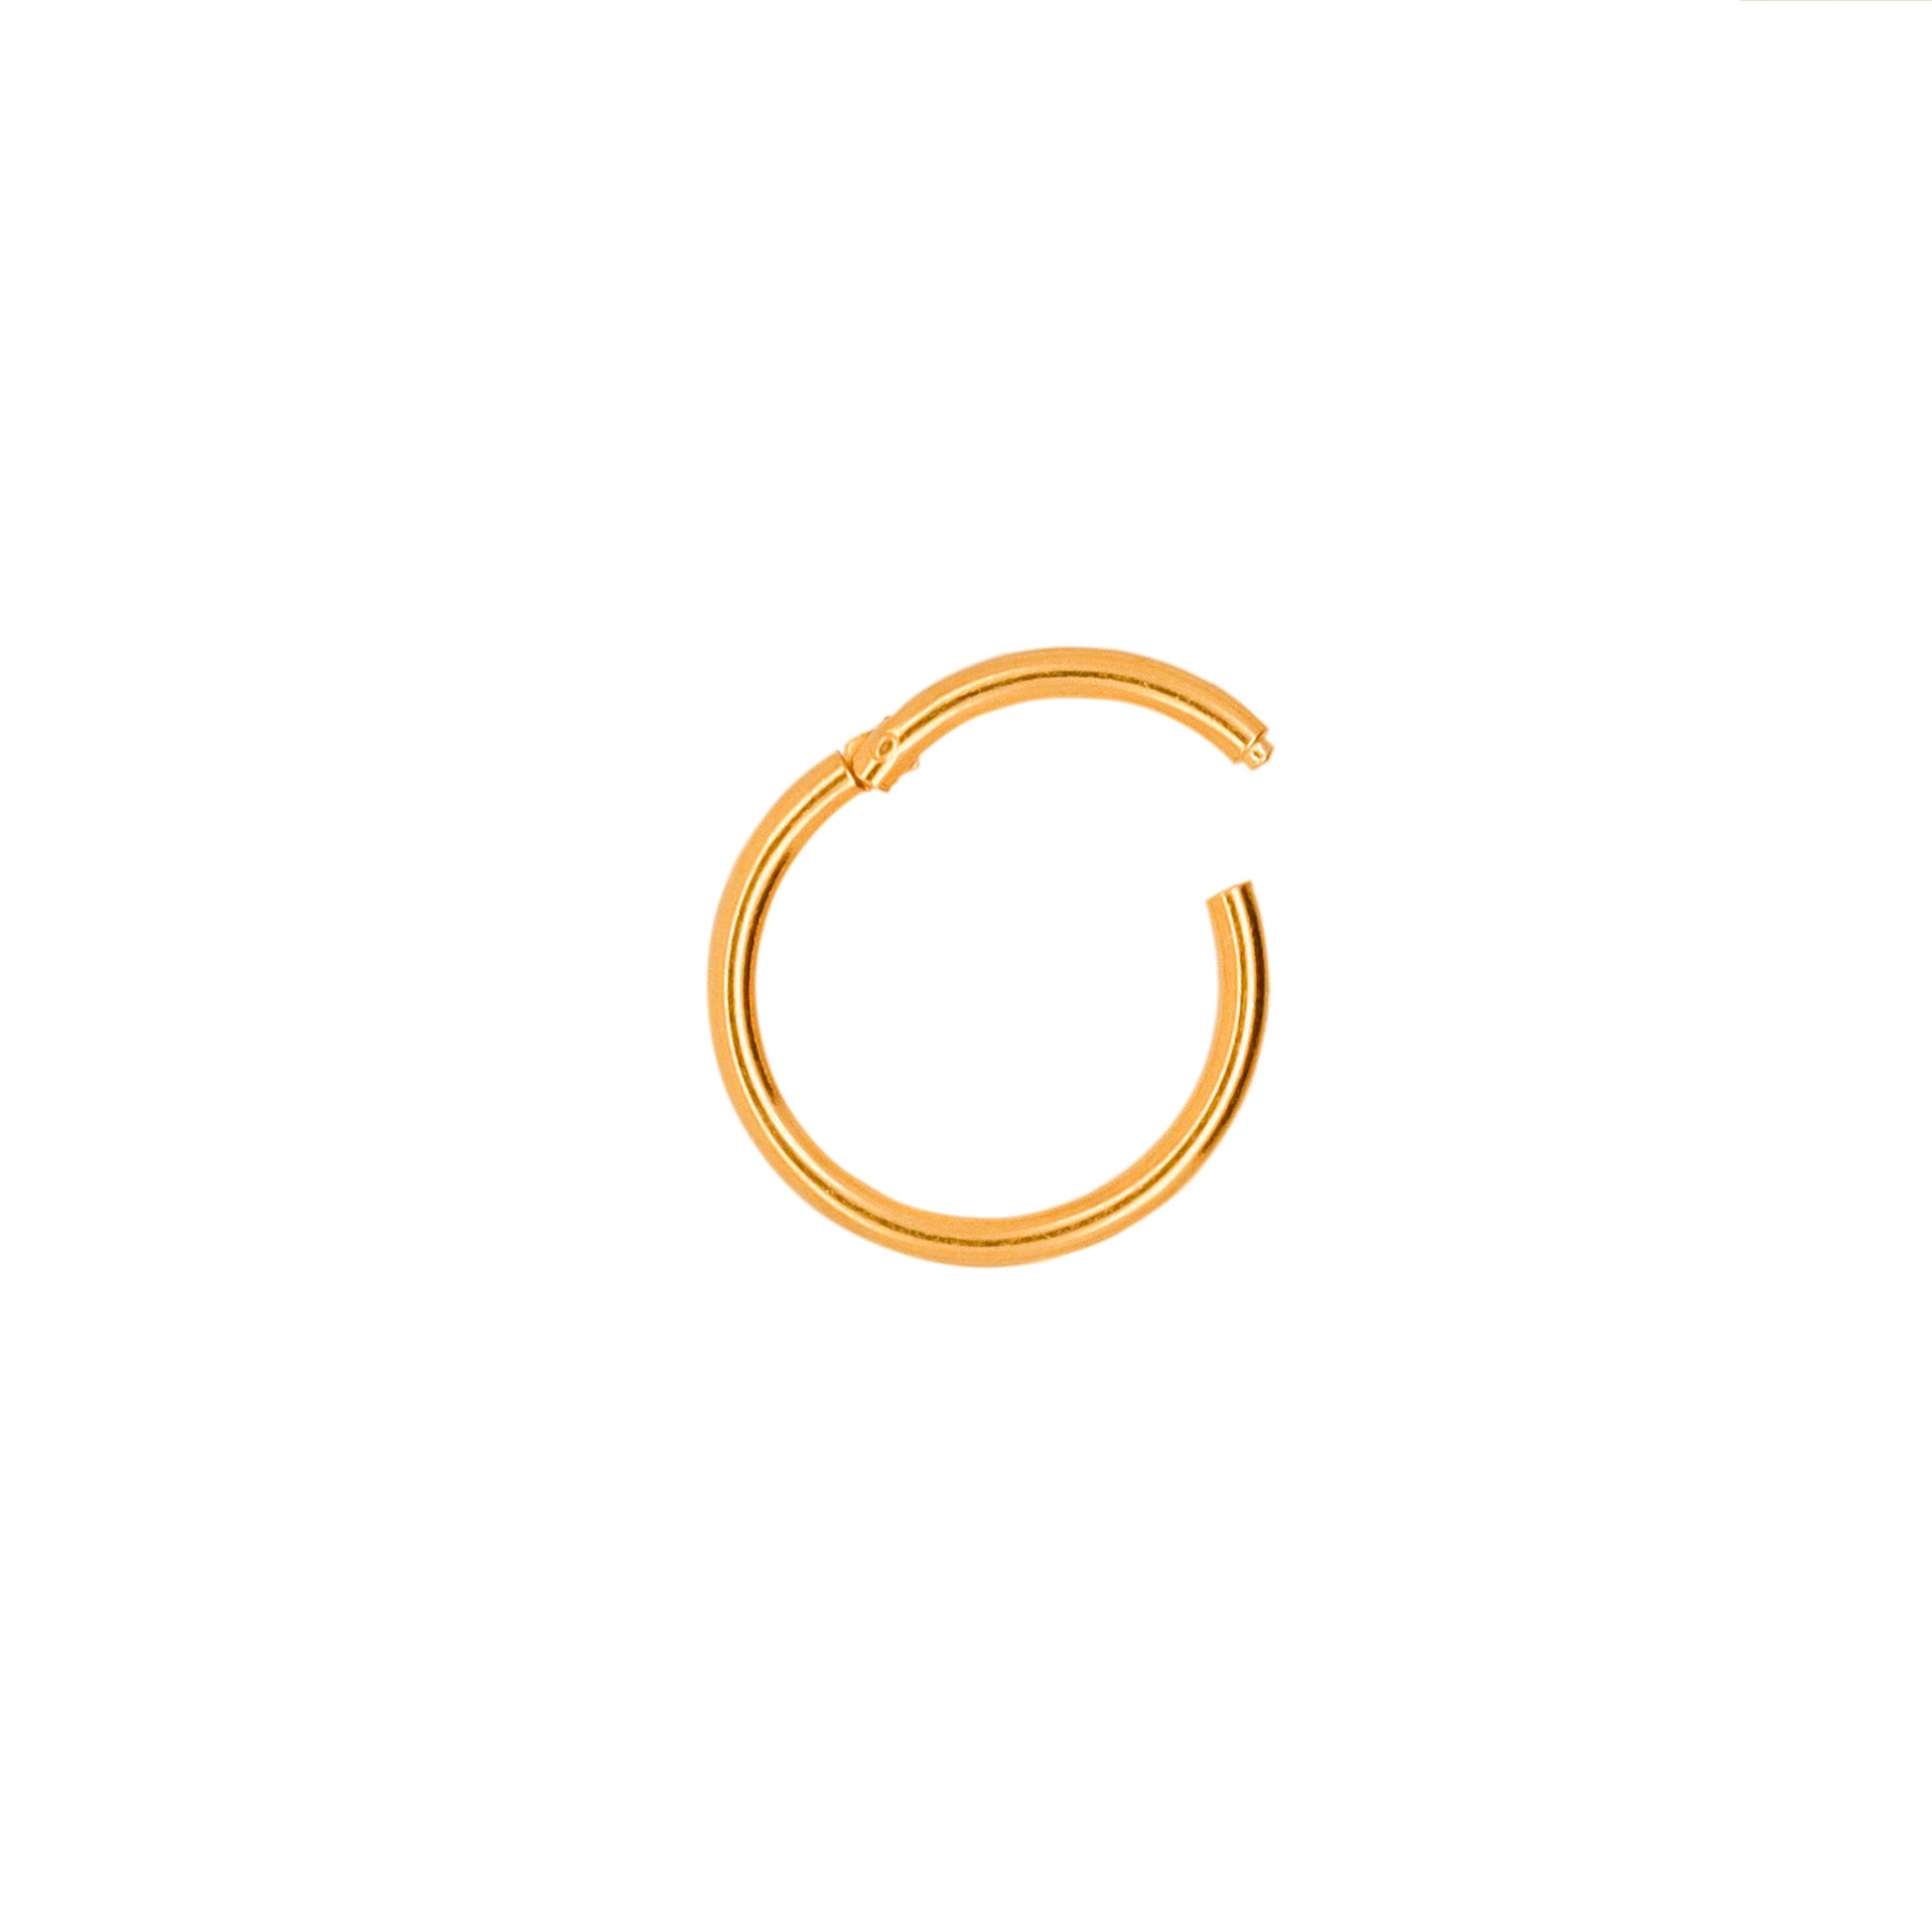 Vermeil | 24k Gold Coated 925 Silver 16G/18G Hinge Hoop Segment Rings | Clicker Hoop | Septum | Cartilage | Daith | Conch | 6mm 8mm 10mm - Sturdy South